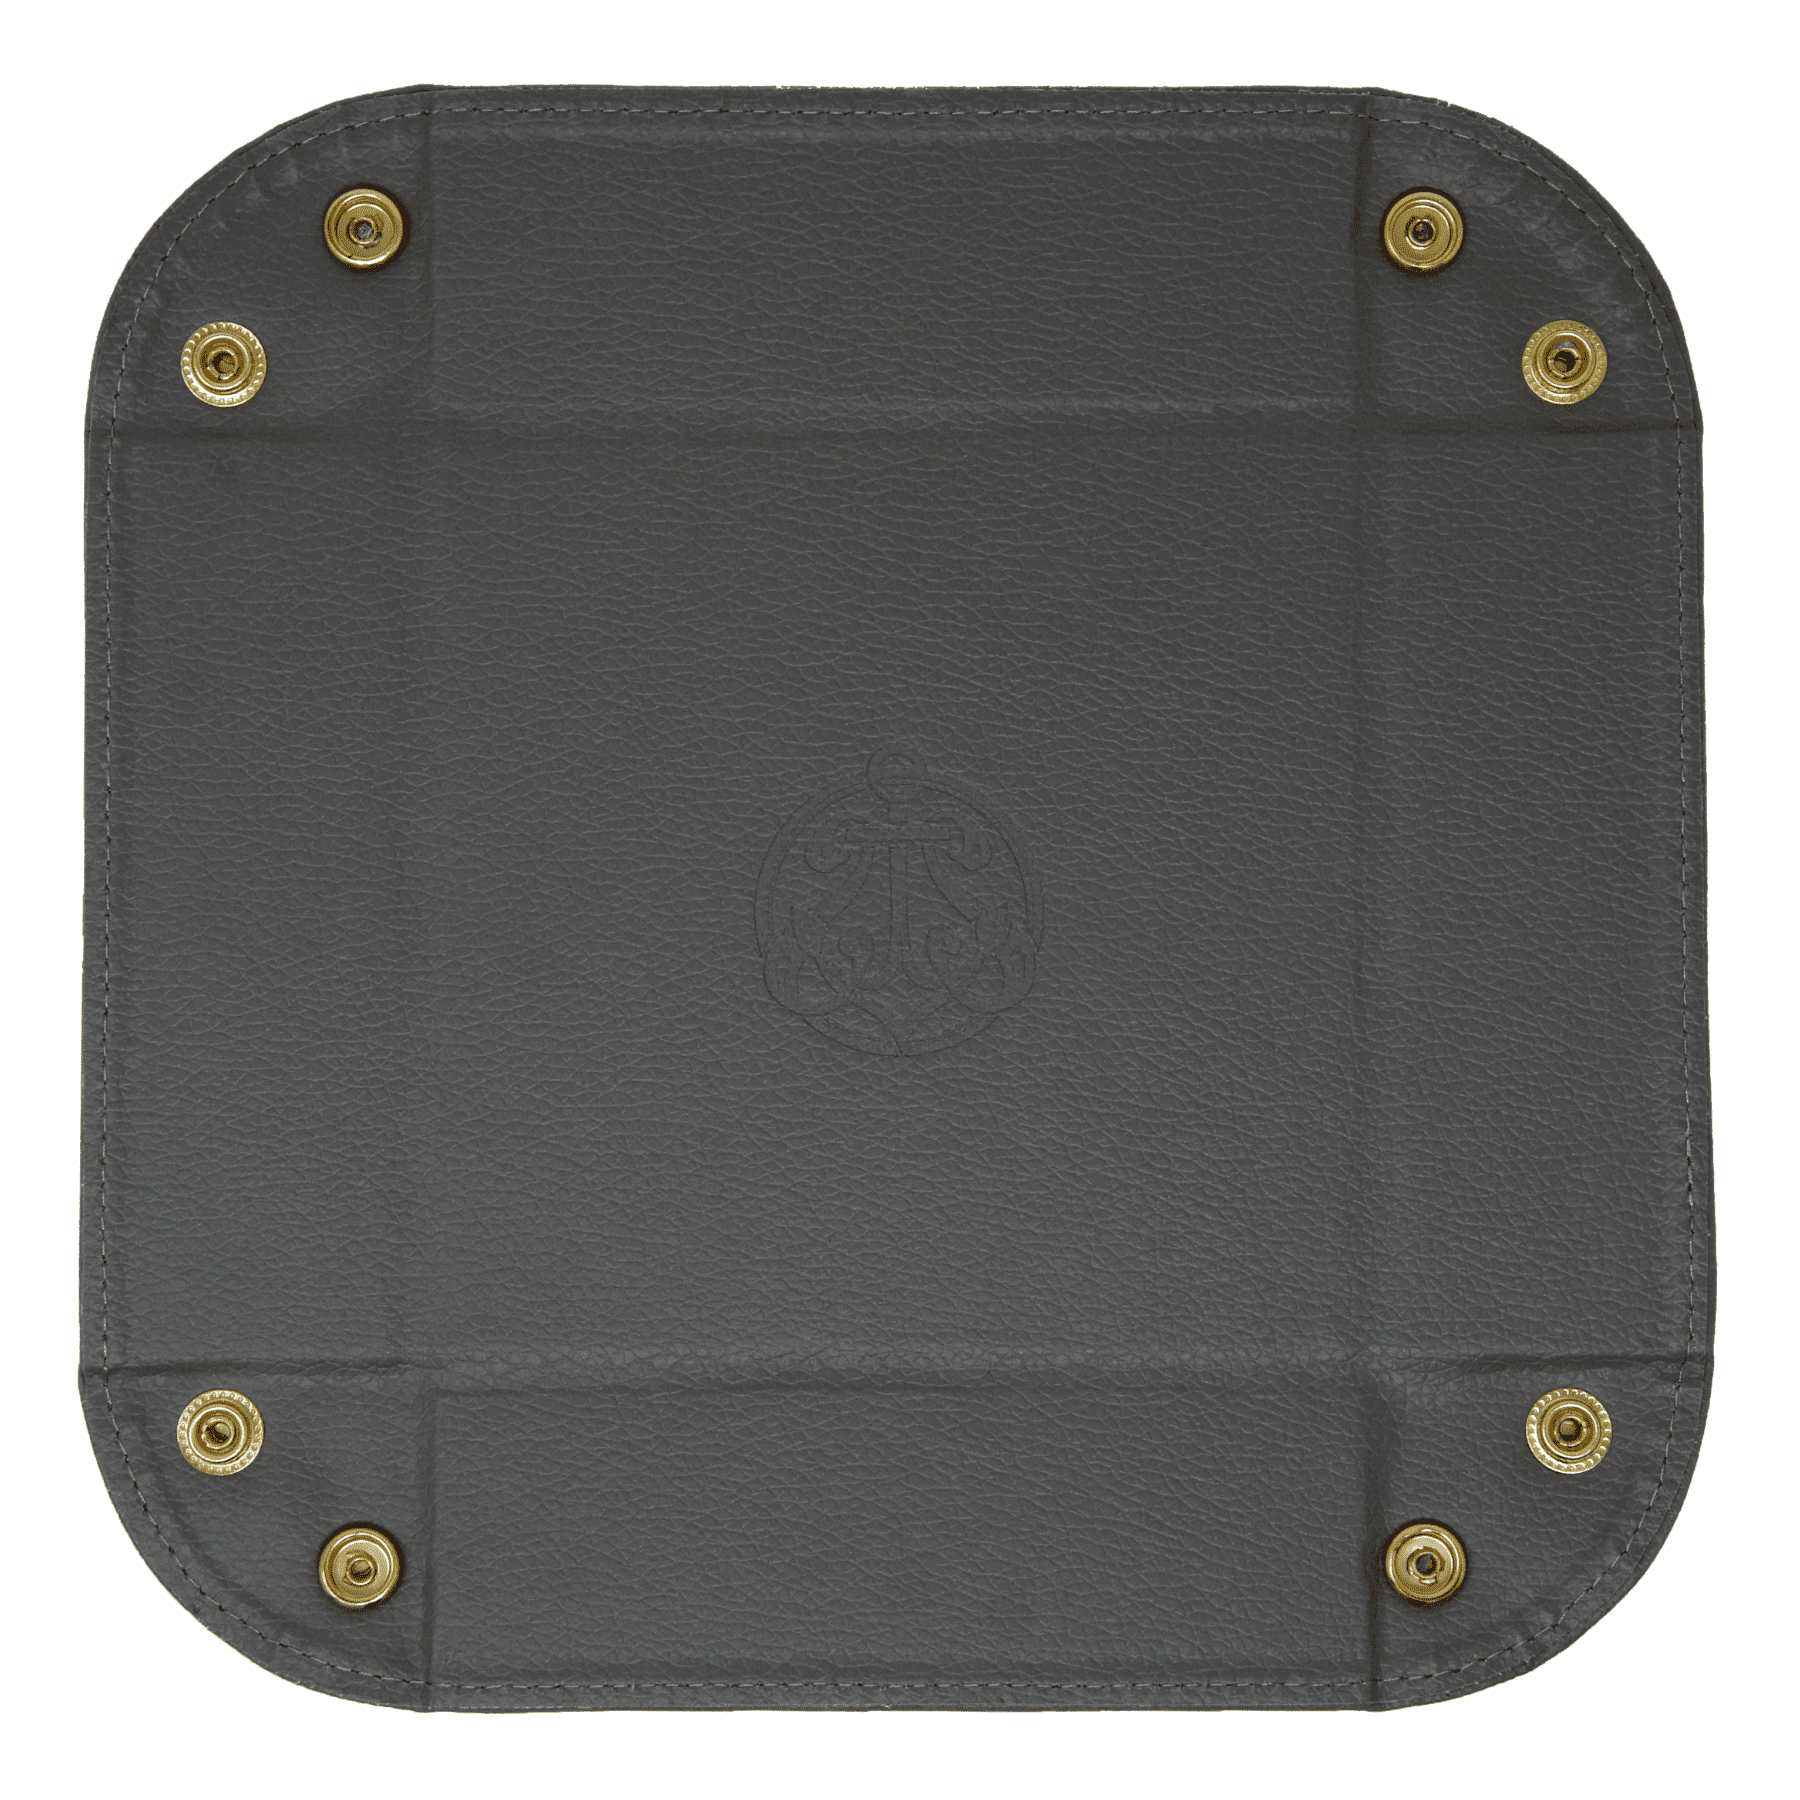 Vegan Leather Valet Tray - Men's Catchall Tray with Brass Snaps 